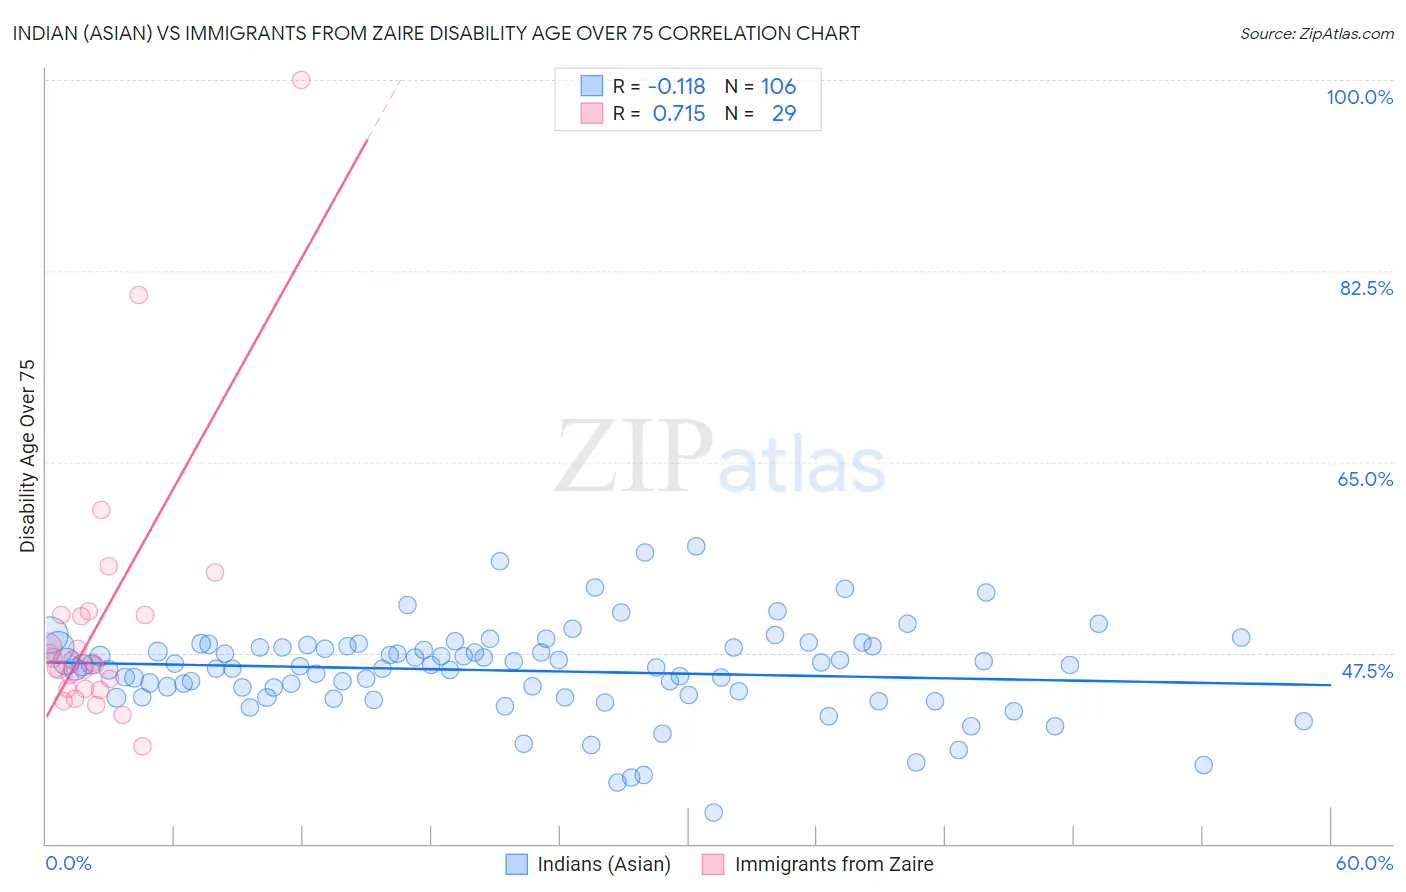 Indian (Asian) vs Immigrants from Zaire Disability Age Over 75